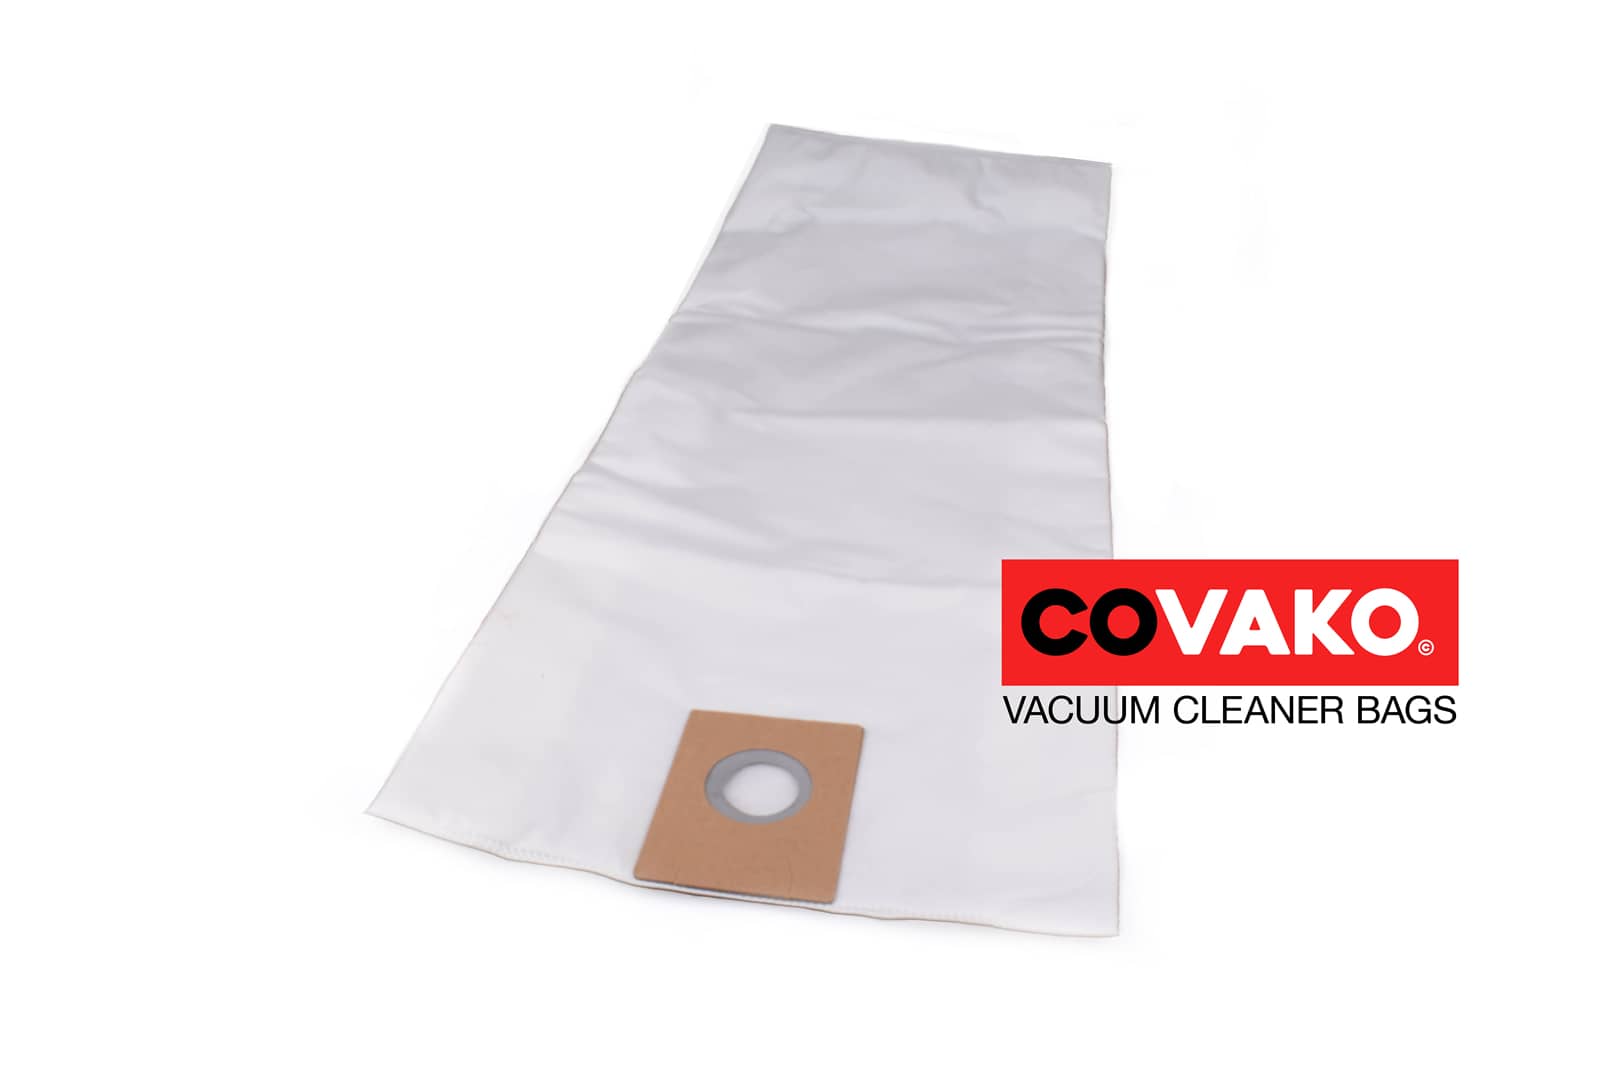 Viper LSU 155 P / Synthesis - Viper vacuum cleaner bags